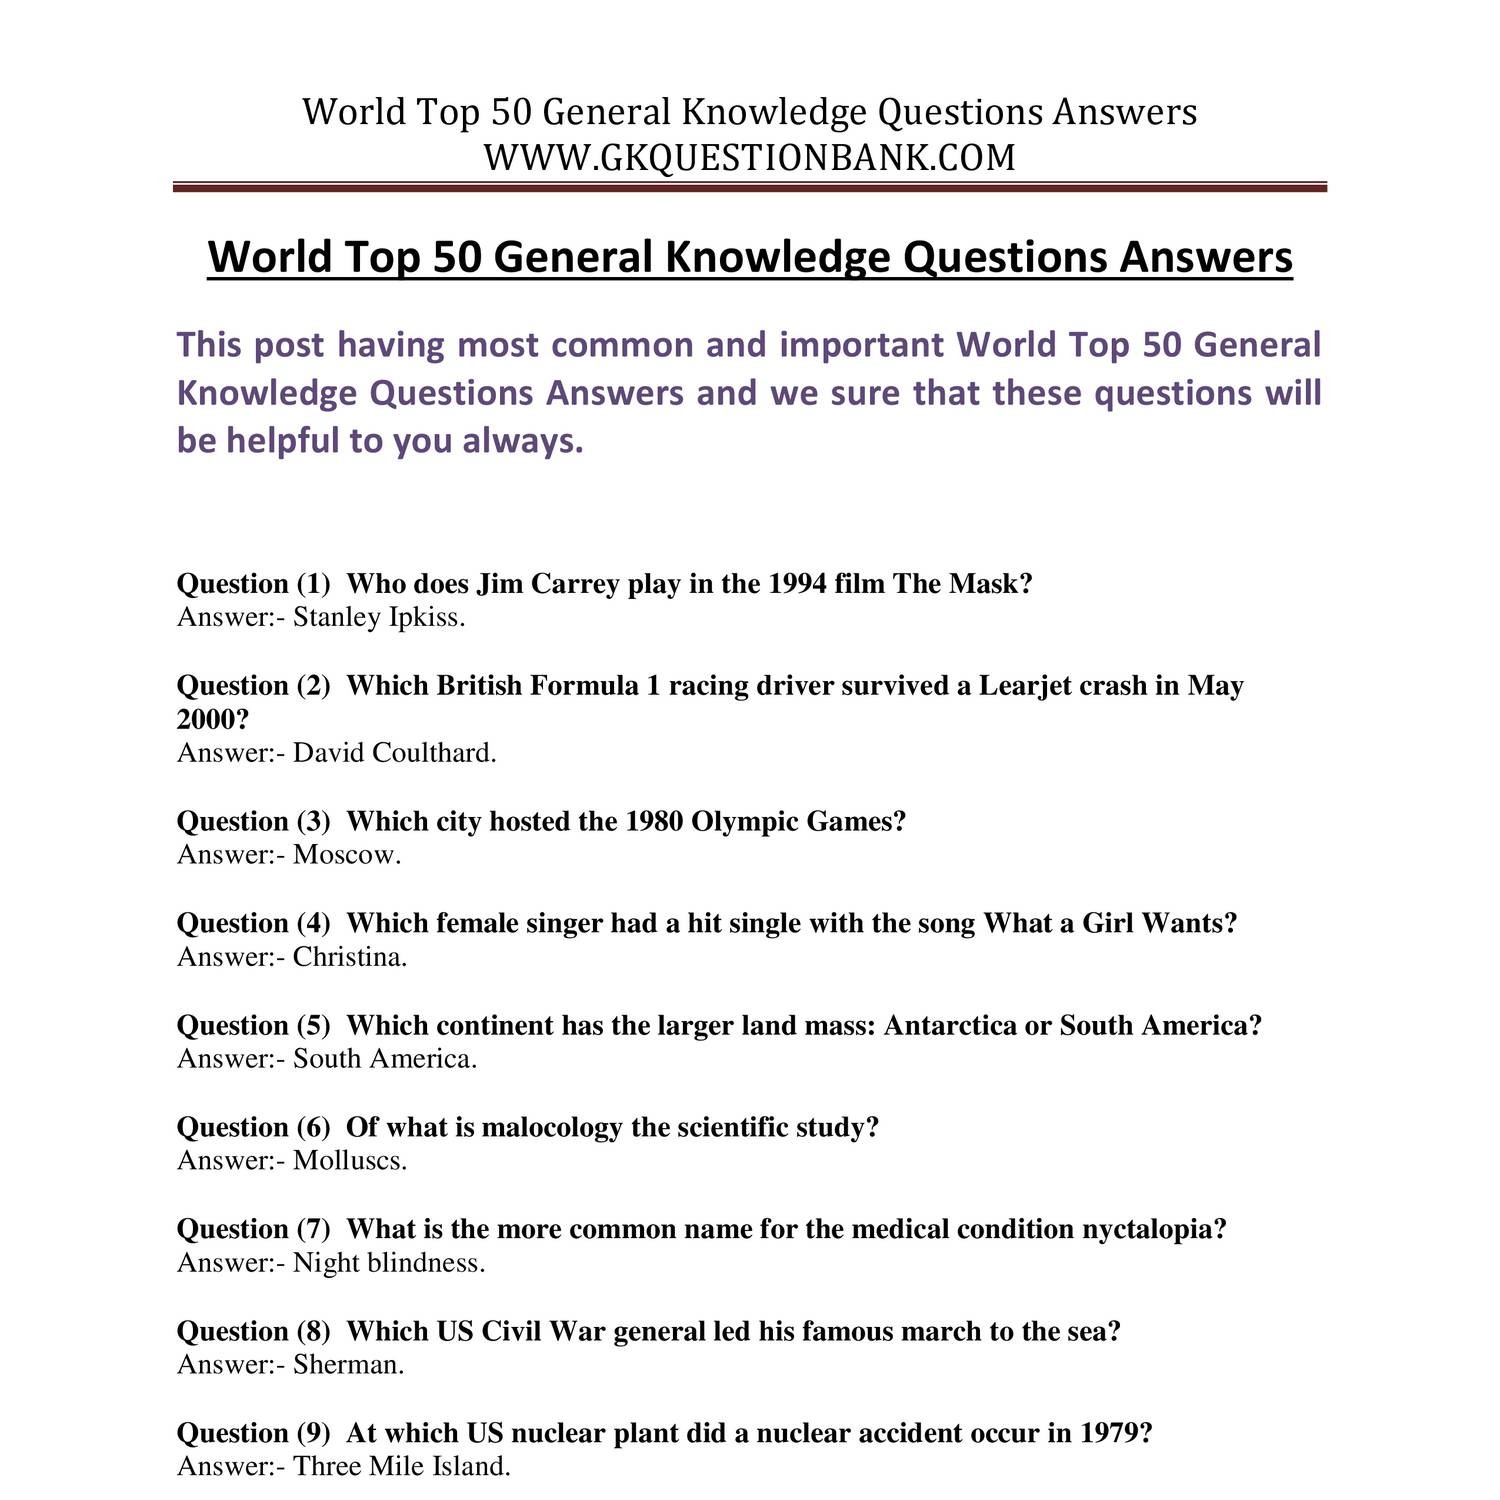 download-world-top-50-general-knowledge-questions-answers-docx-docdroid